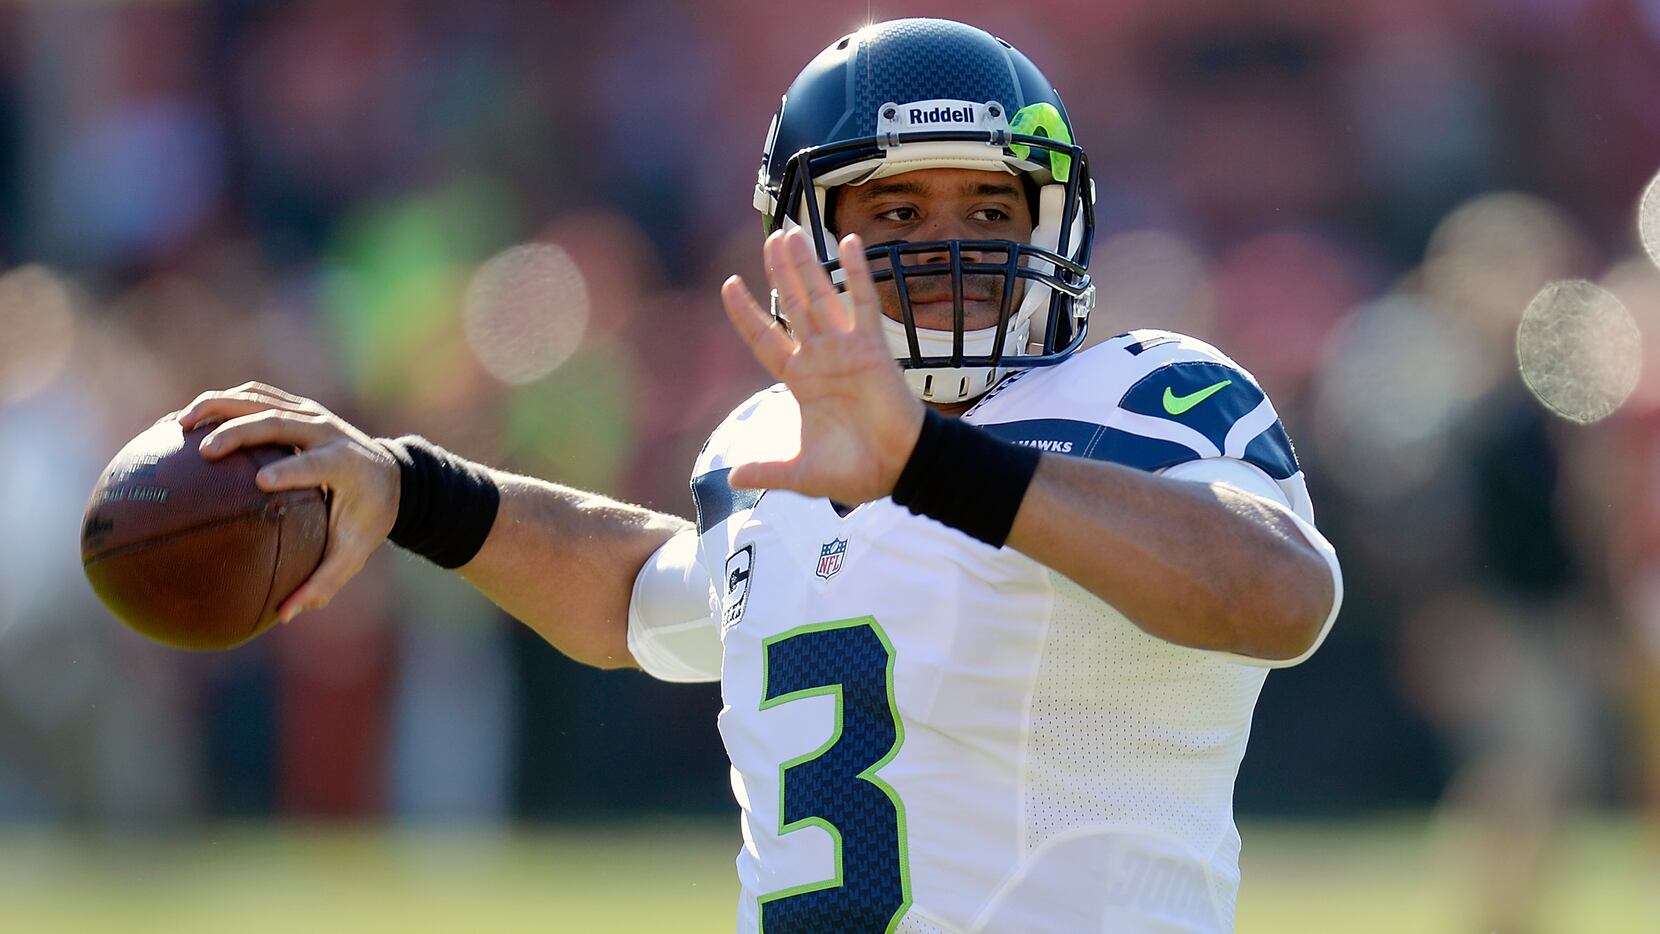 LOOK: Unhappy Seahawks Fan Gives Russell Wilson a New Name